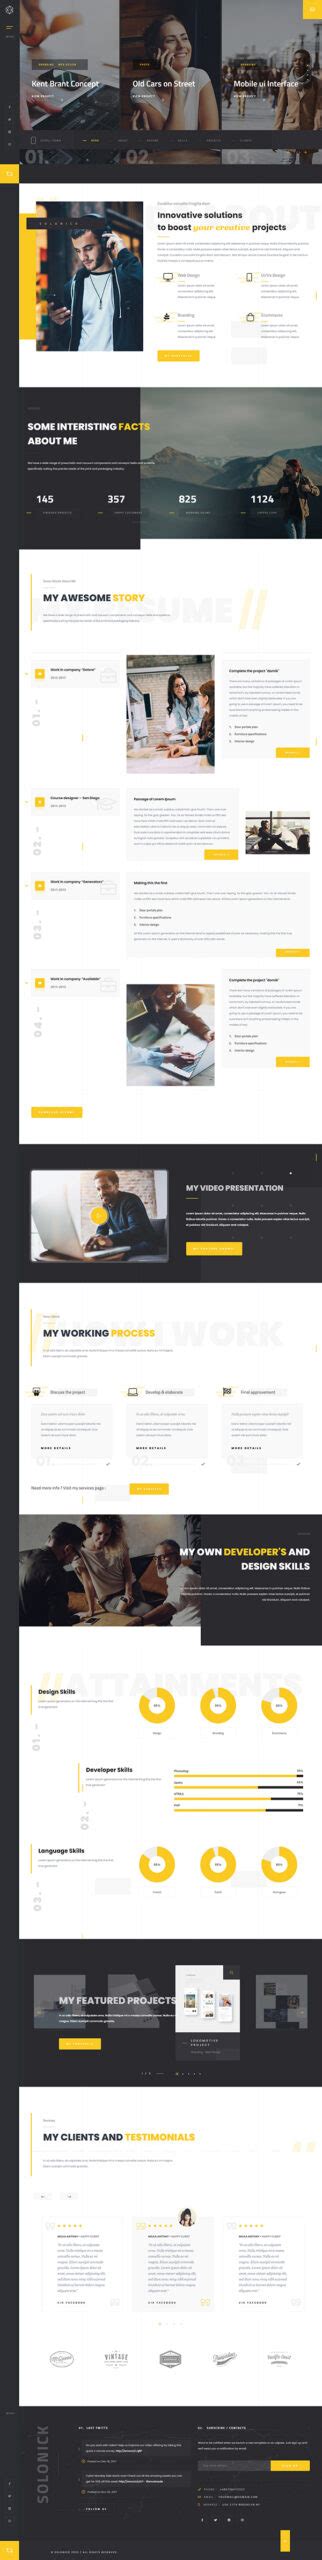 15 Best Responsive Wordpress Themes For Corporate Websites Graphic